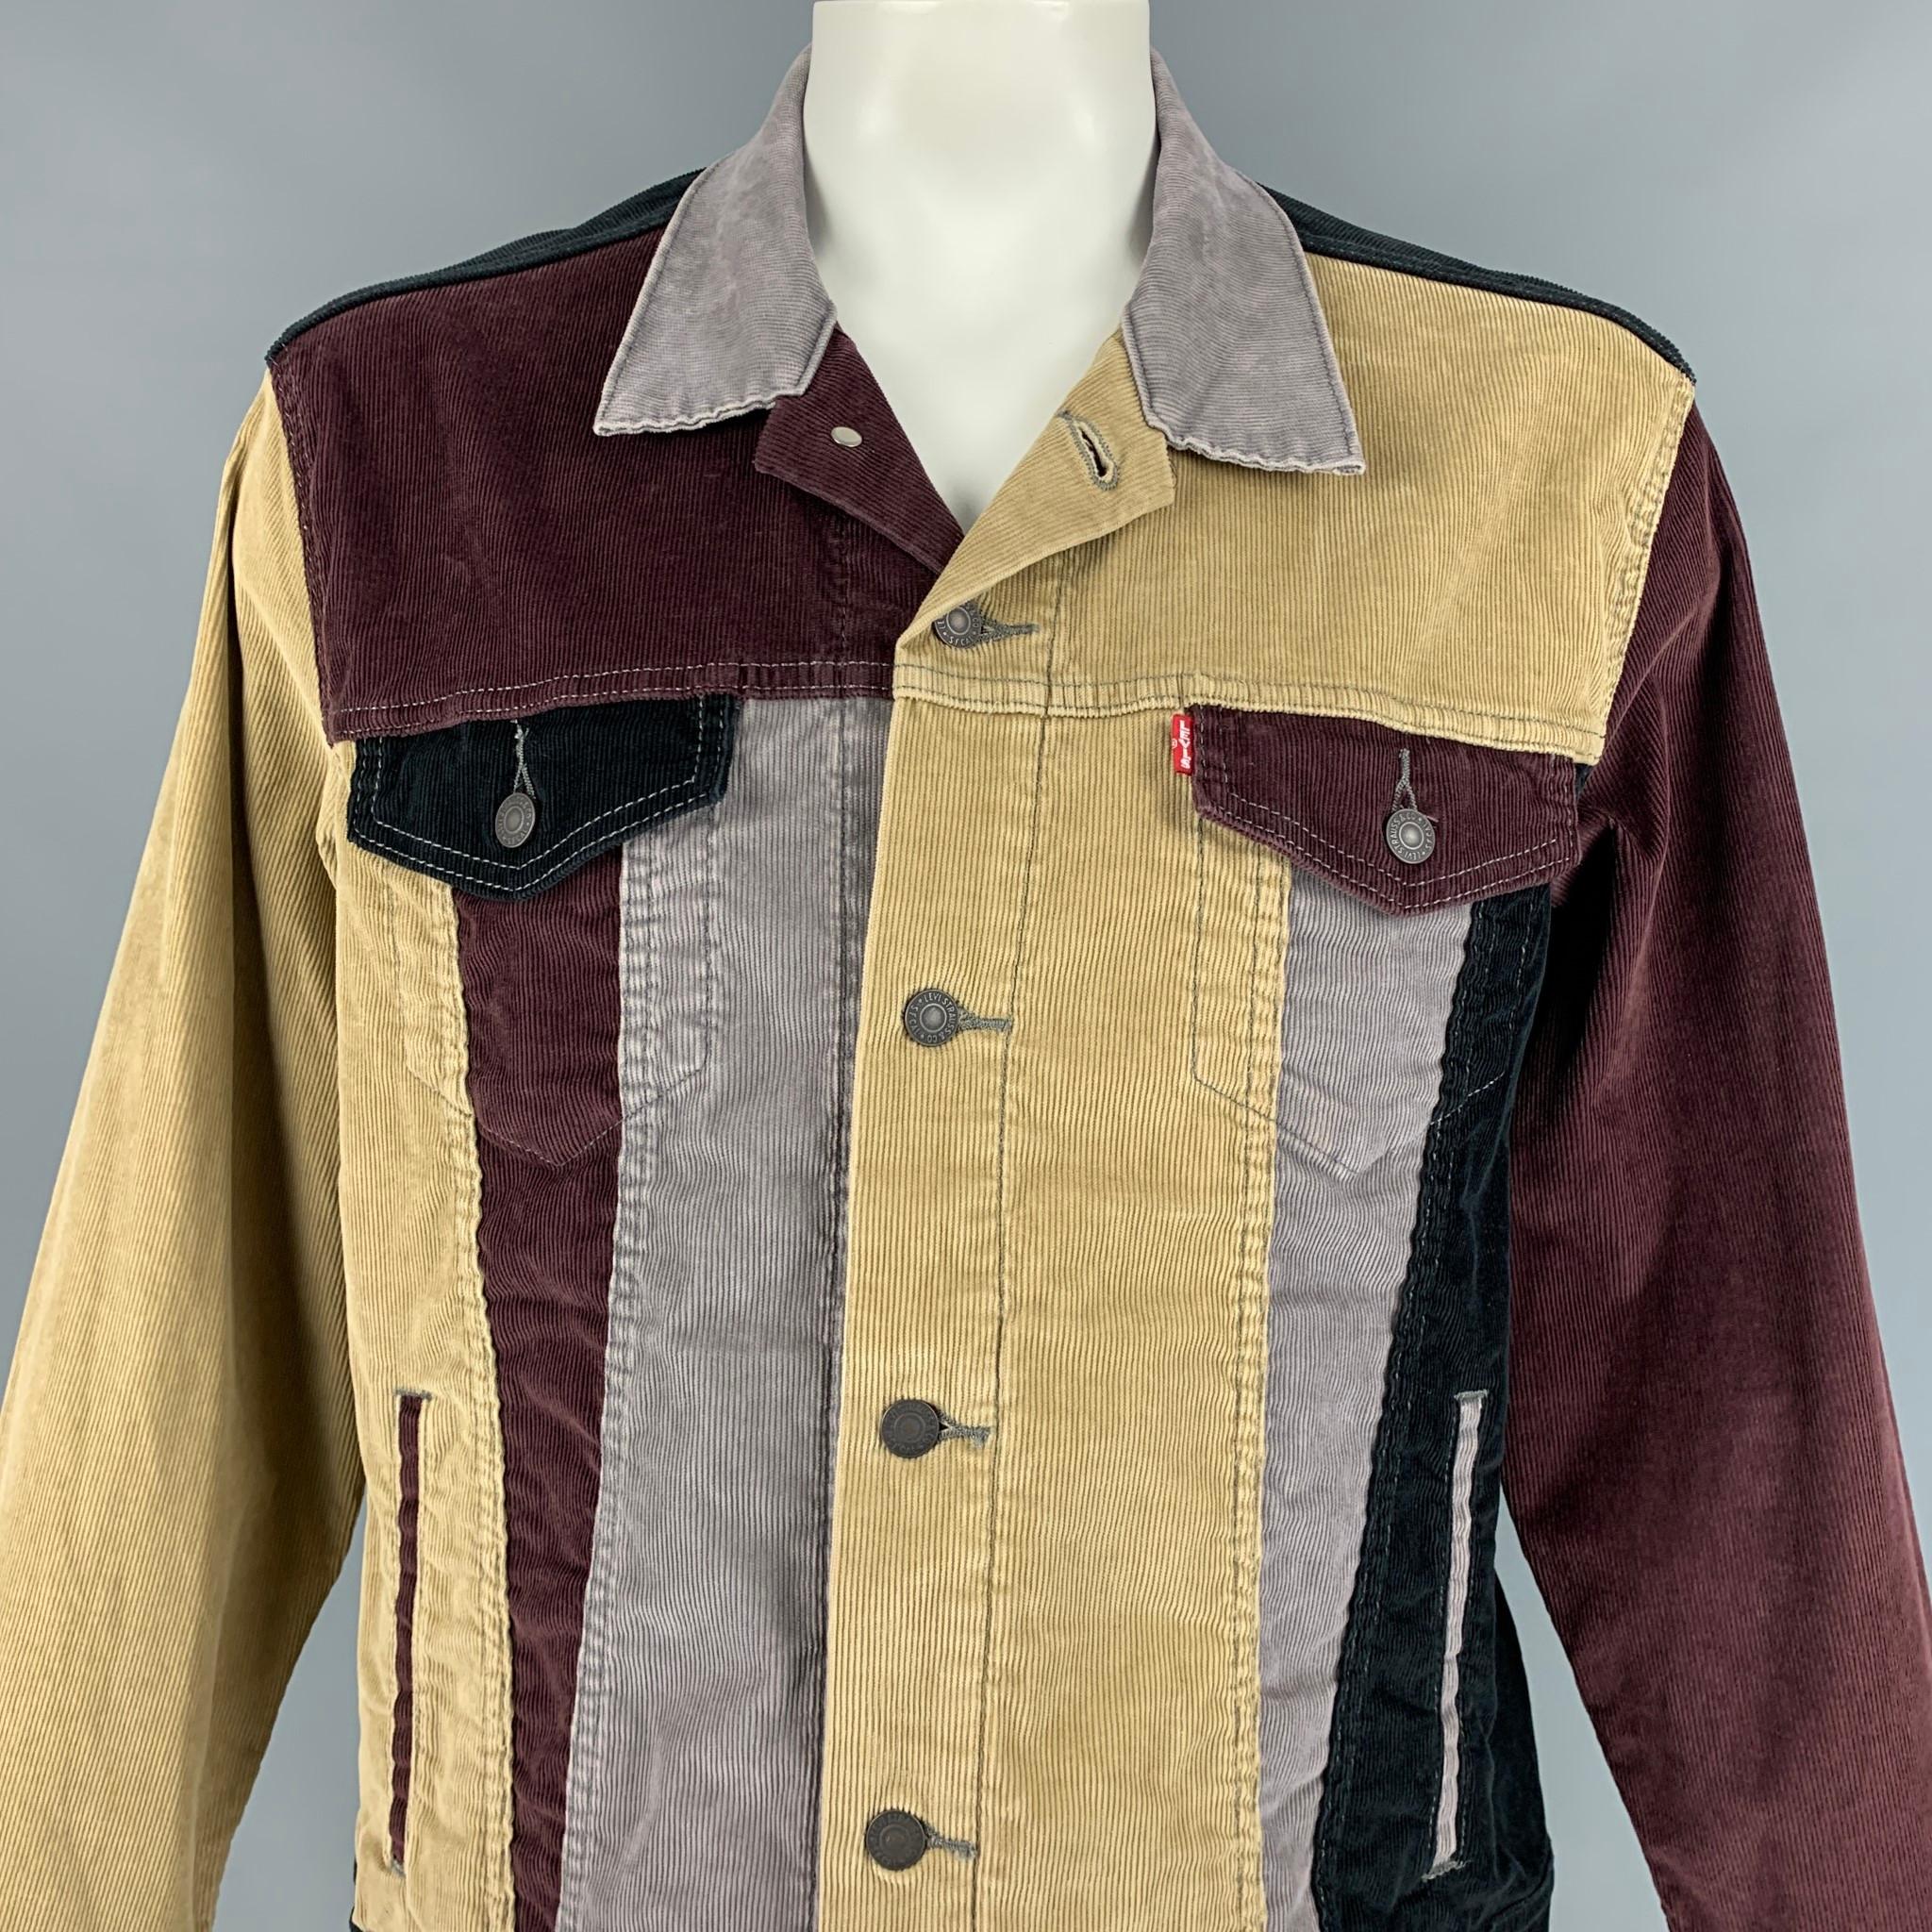 LEVI'S PREMIUM jacket comes in a multi-color patchwork corduroy featuring a trucker style, front pockets, spread collar, contrast stitching, and a buttoned closure. 

Very Good Pre-Owned Condition.
Marked: XL

Measurements:

Shoulder: 21 in.
Chest: